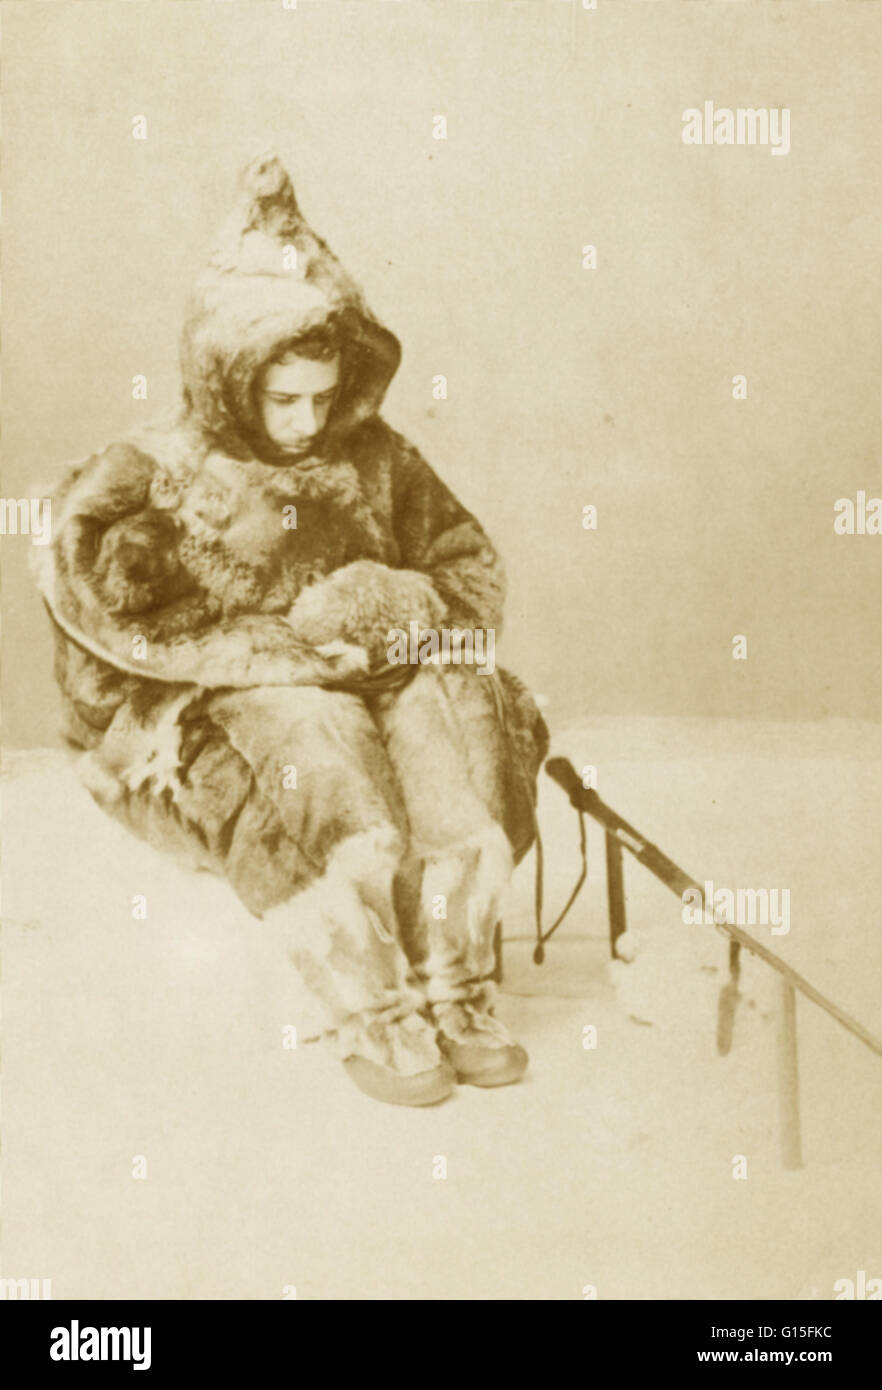 Franz Boas (July 9, 1858 - December 21, 1942) was a German American anthropologist. A pioneer of modern anthropology, he has been called the 'Father of American Anthropology'. Here, Boas is in the studio at Minden posing as an Inuit awaiting the return of Stock Photo